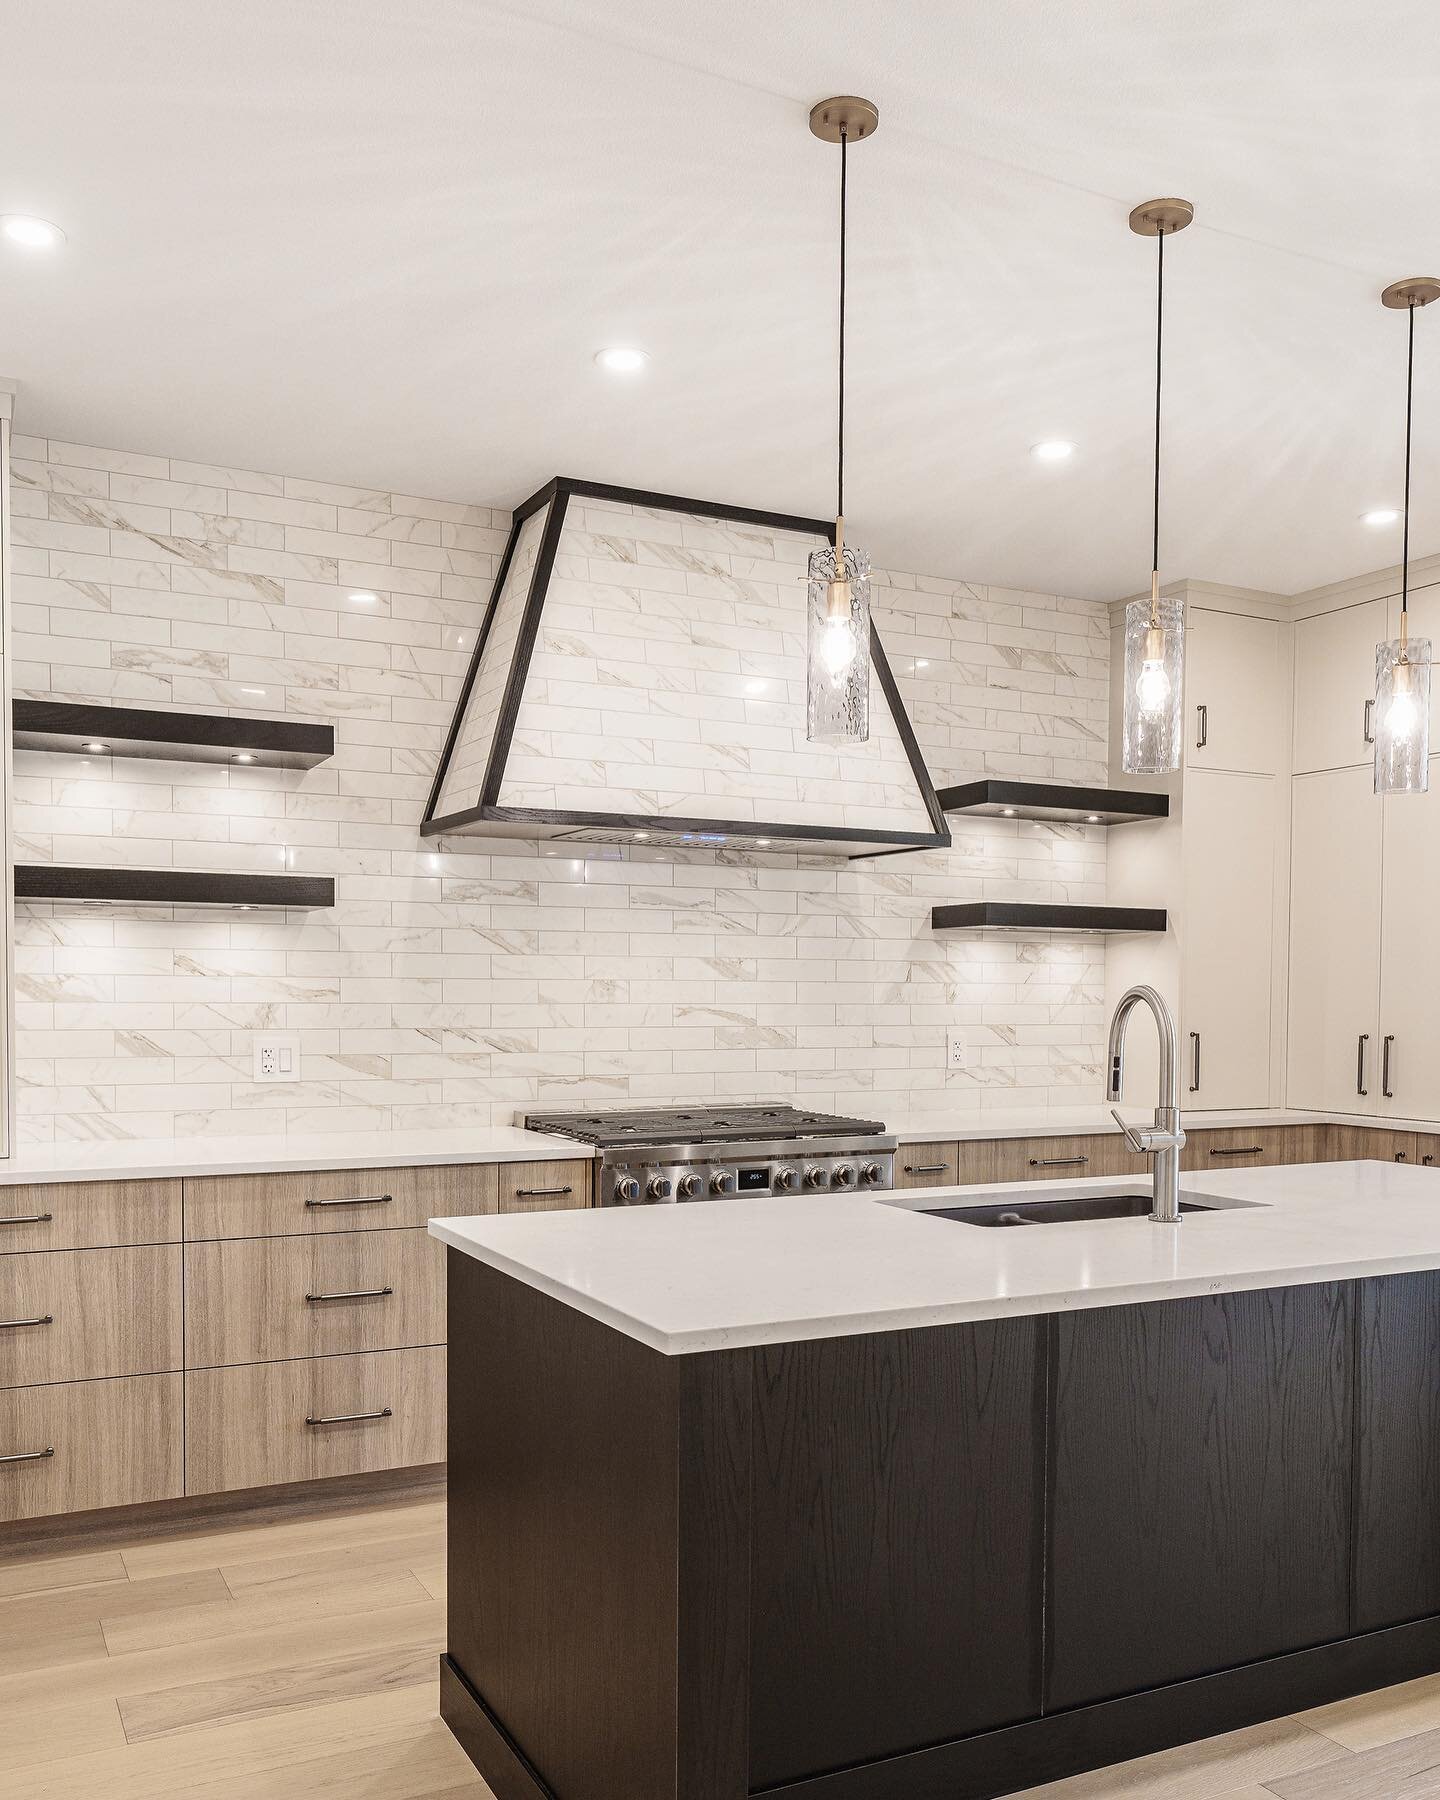 The backsplash and hood fan display a tile selection that is elegant and dreamy ✨ The tiles extend all the way to the ceiling, creating a seamless and visually stunning backdrop. Colour palette is timeless ♾️

#kitchen #interiordesign #realestatephot